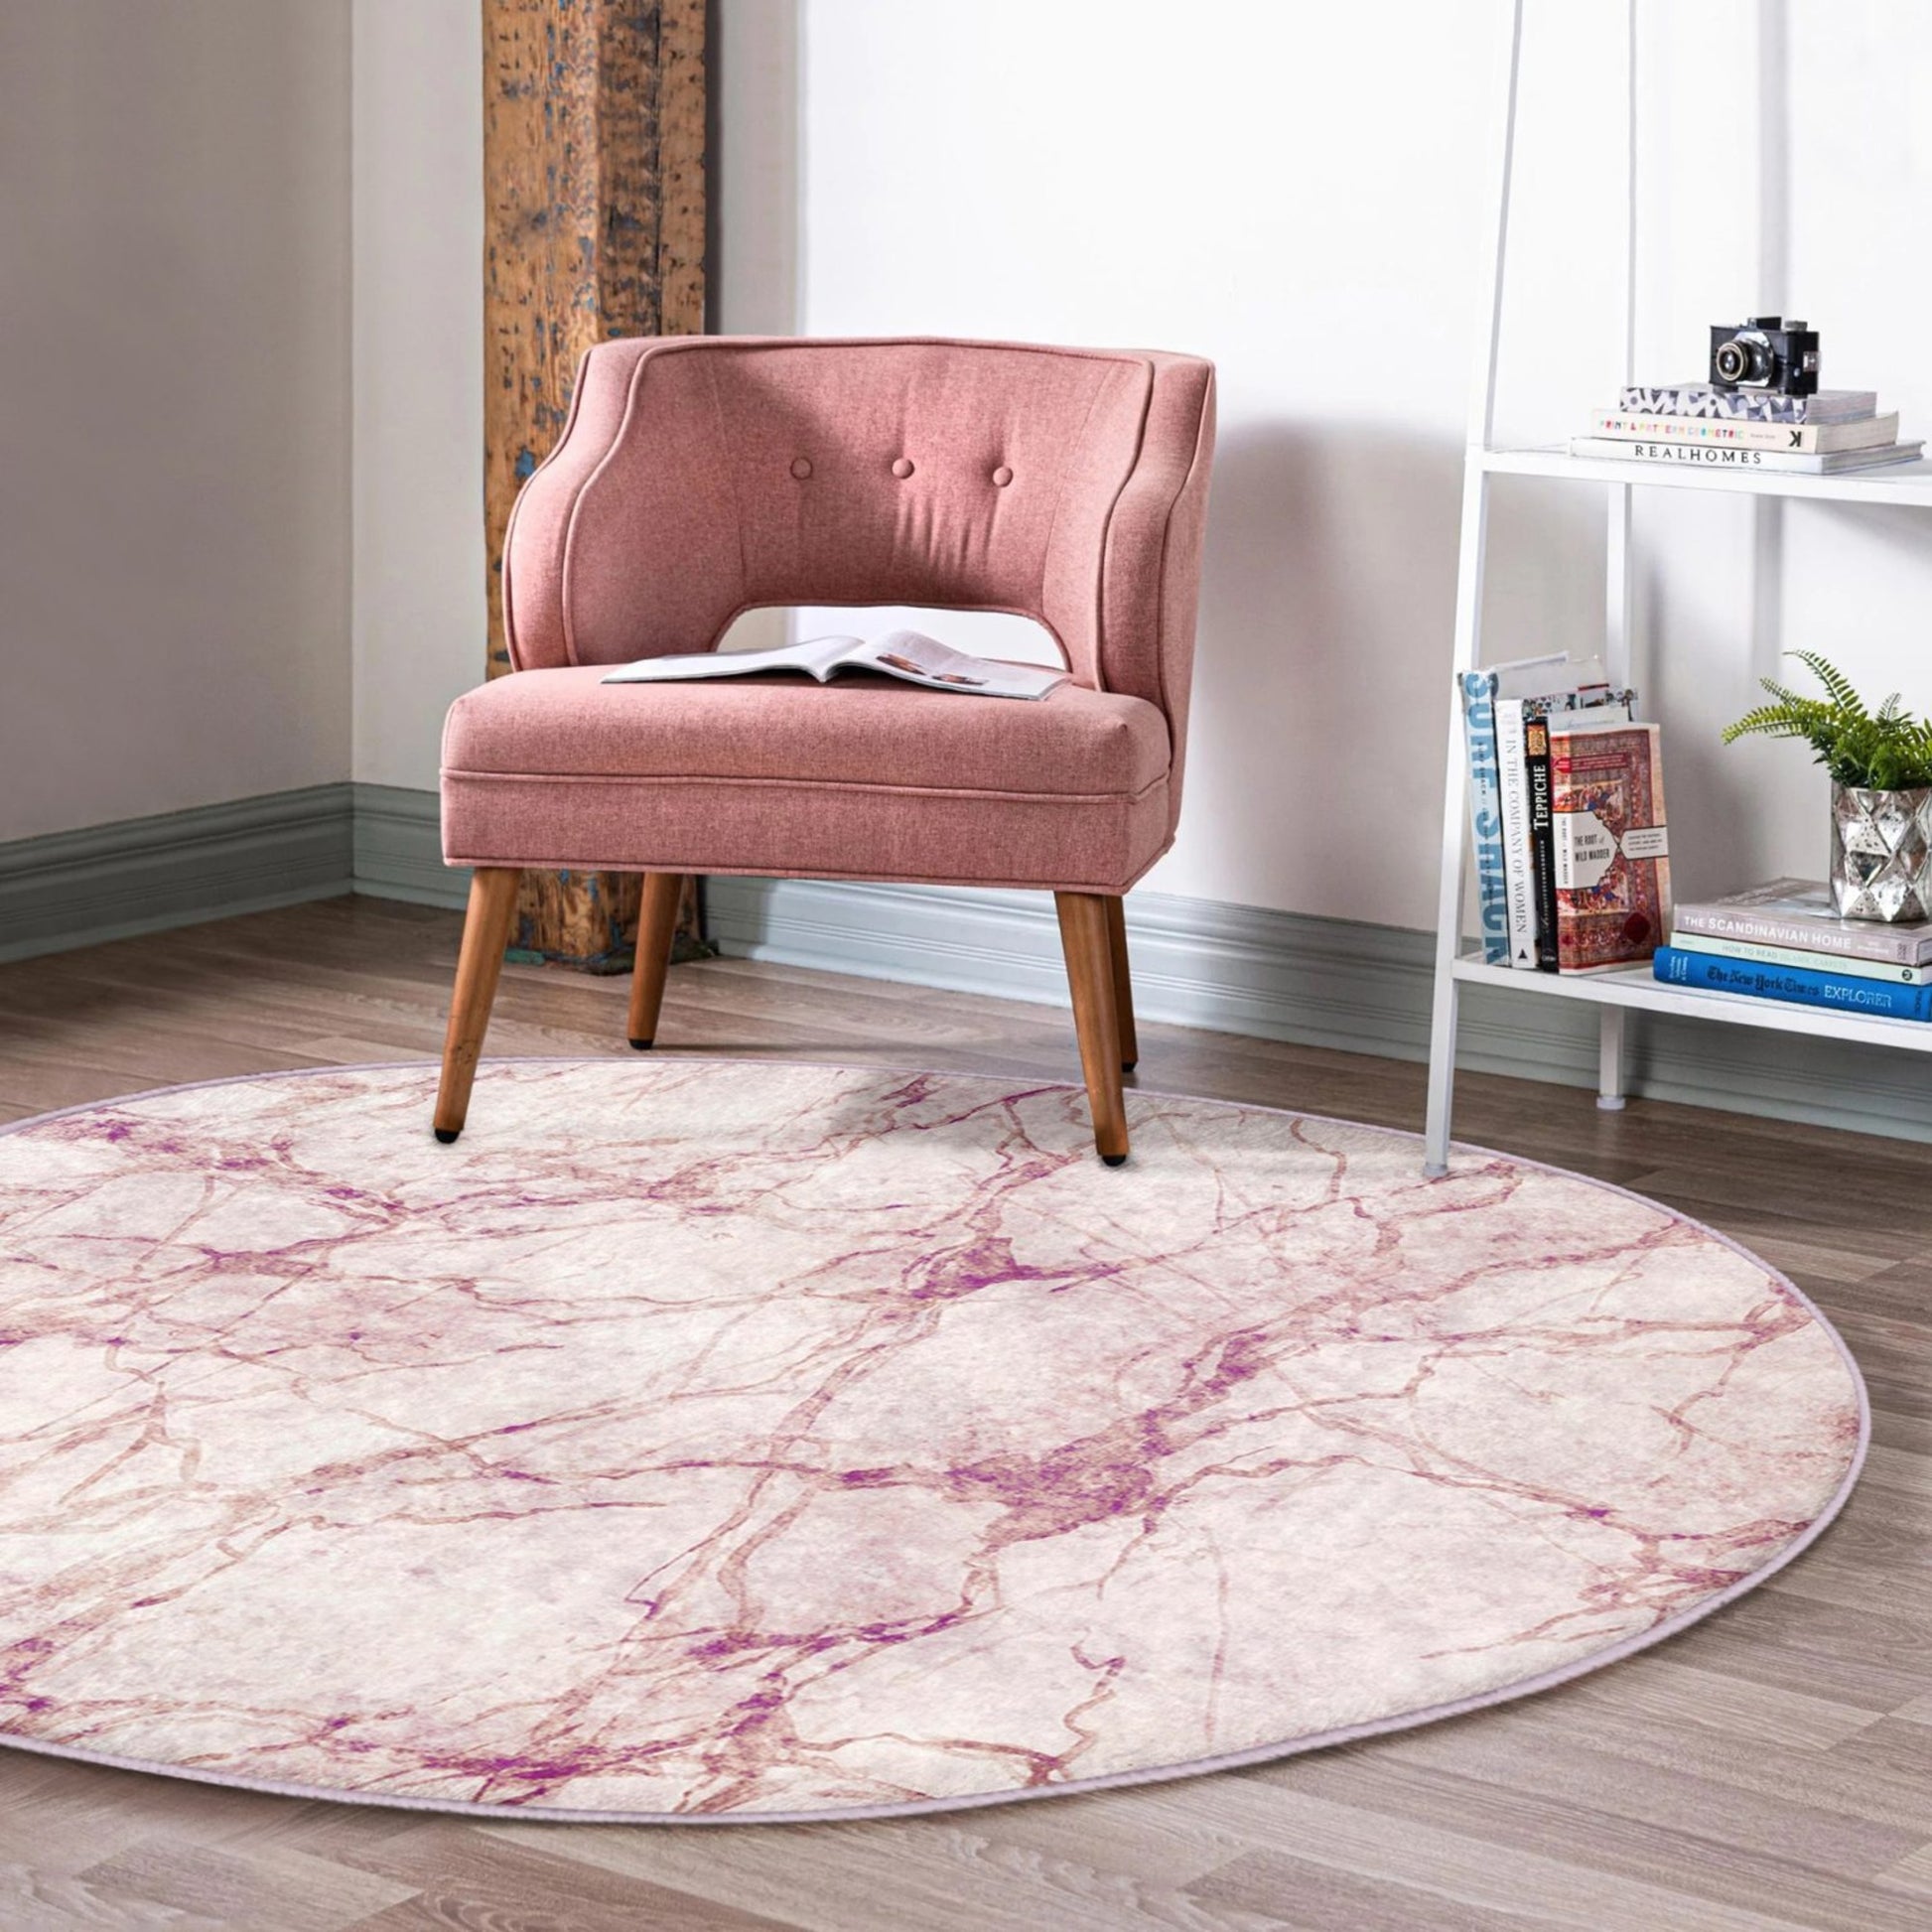 Round Patterned Floor Rug - Modern Accent